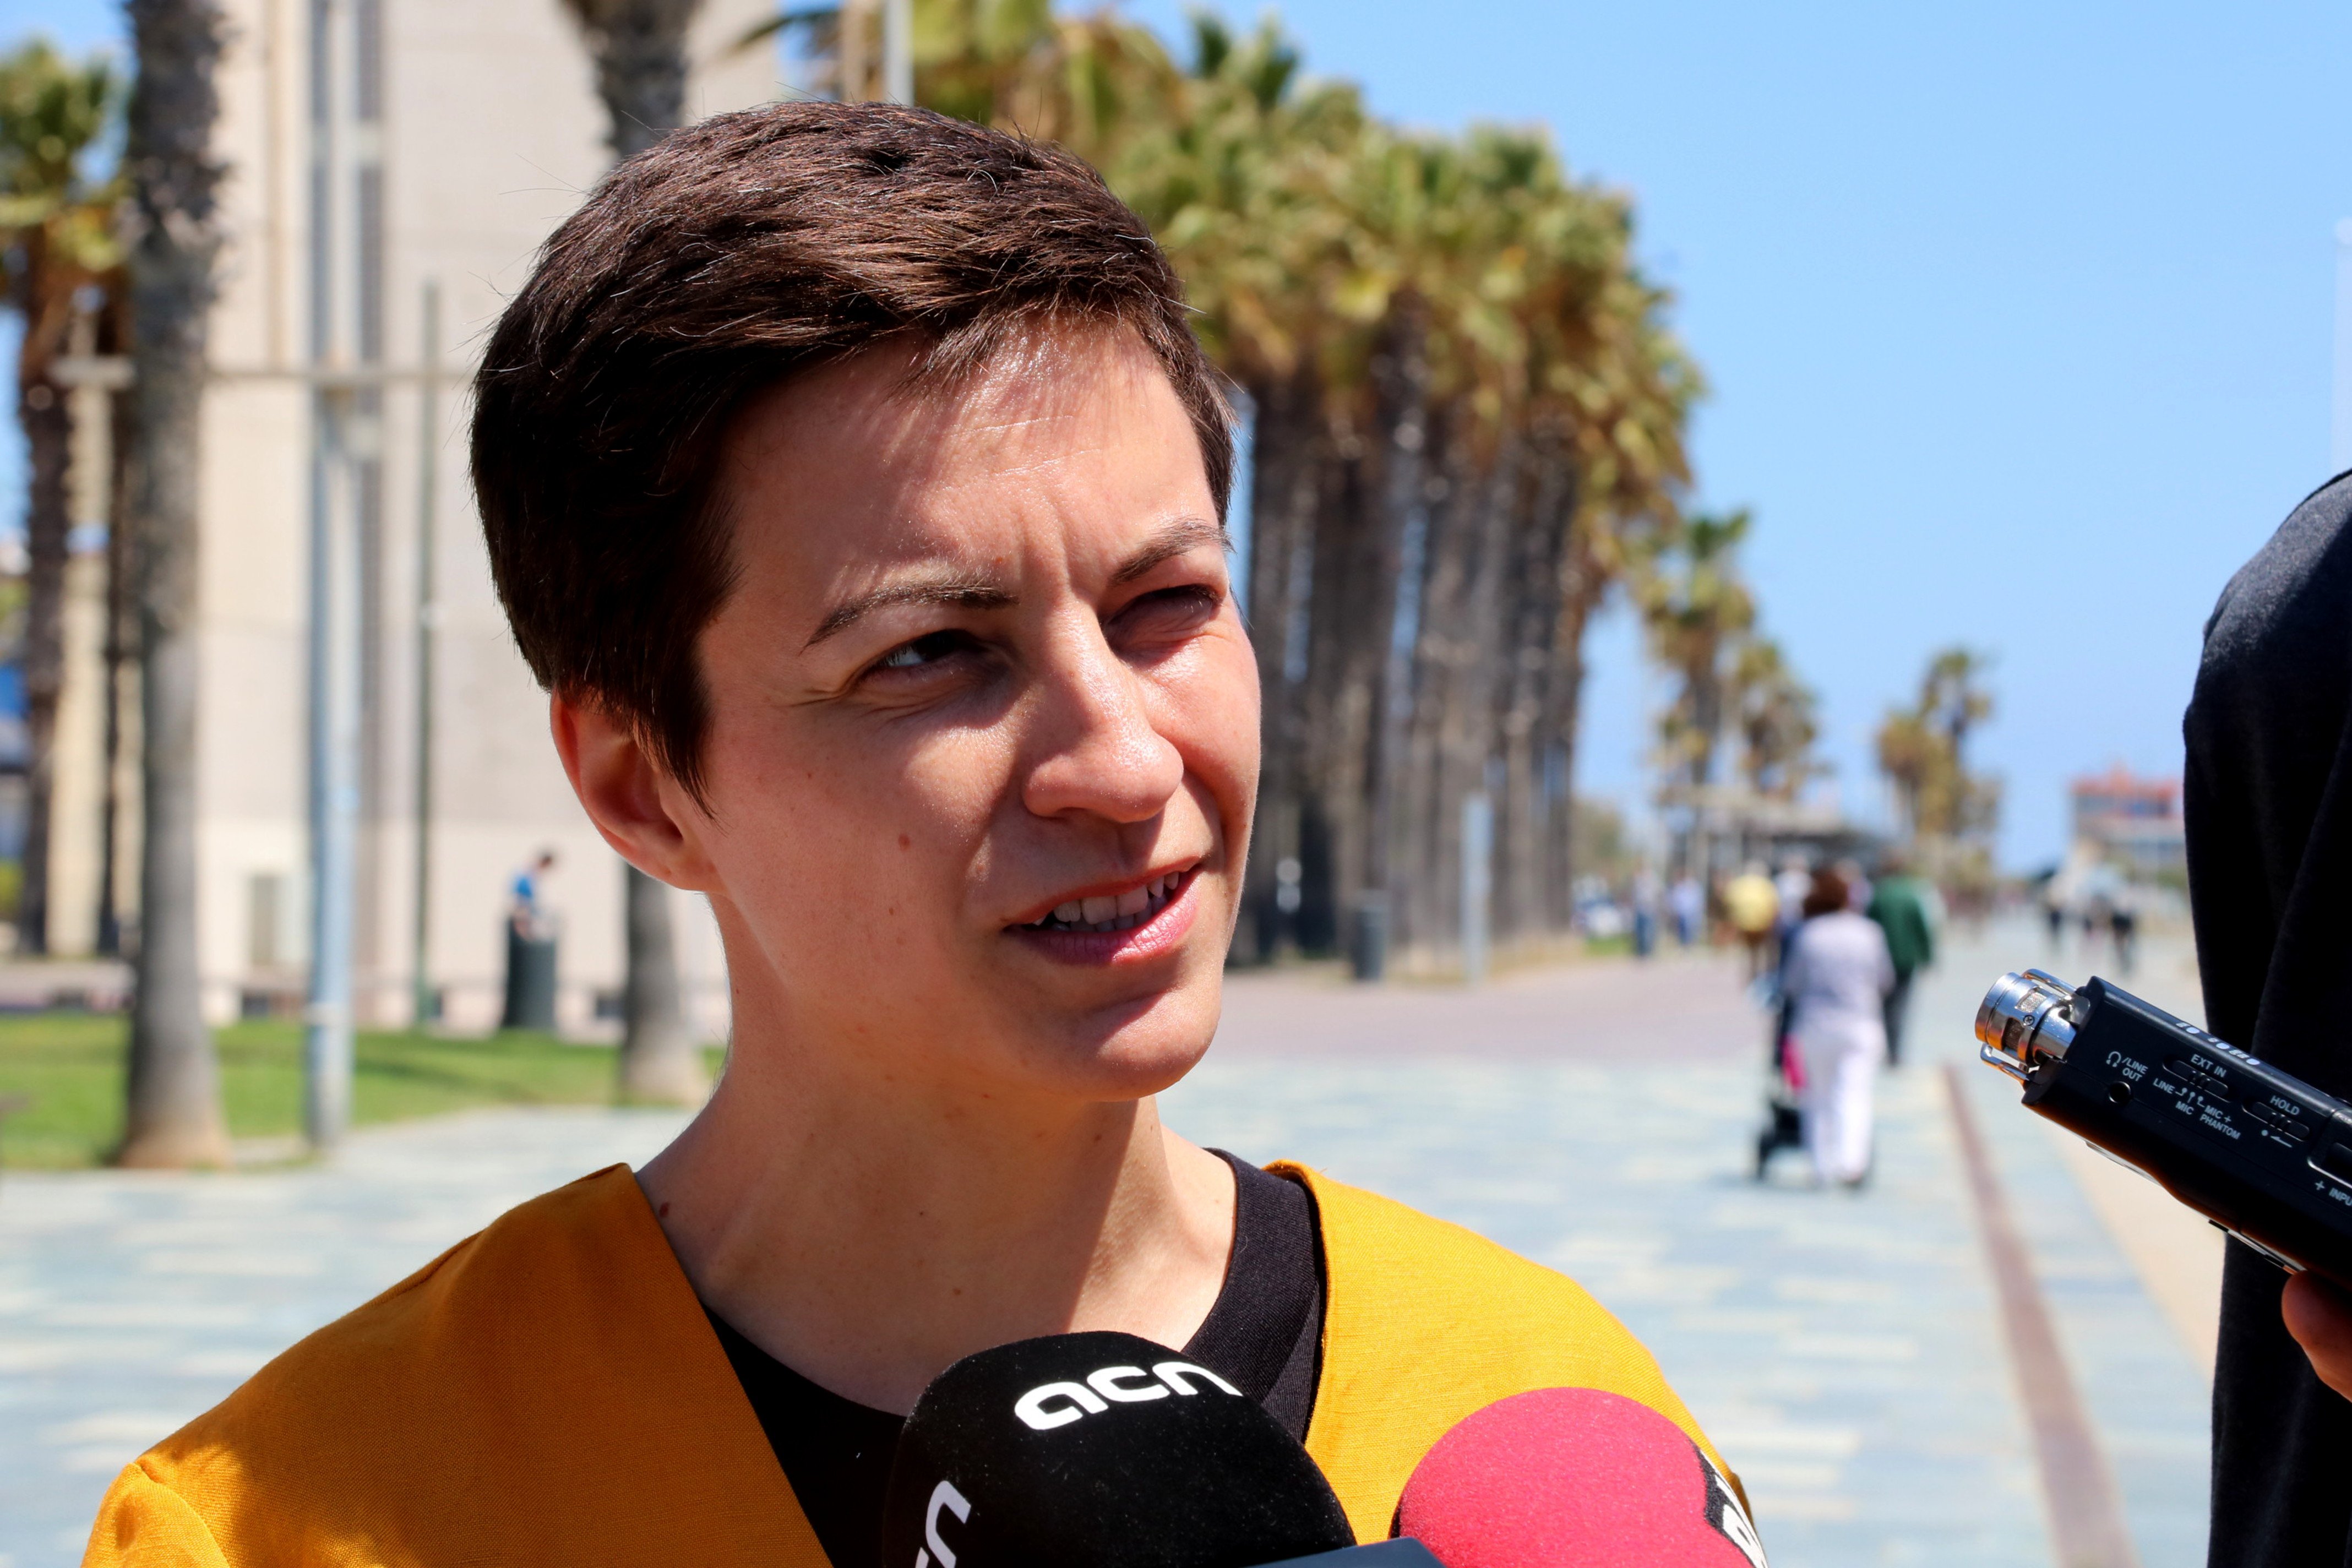 Leader of European Greens Ska Keller asks for "Junqueras' parliamentary rights to be restituted"